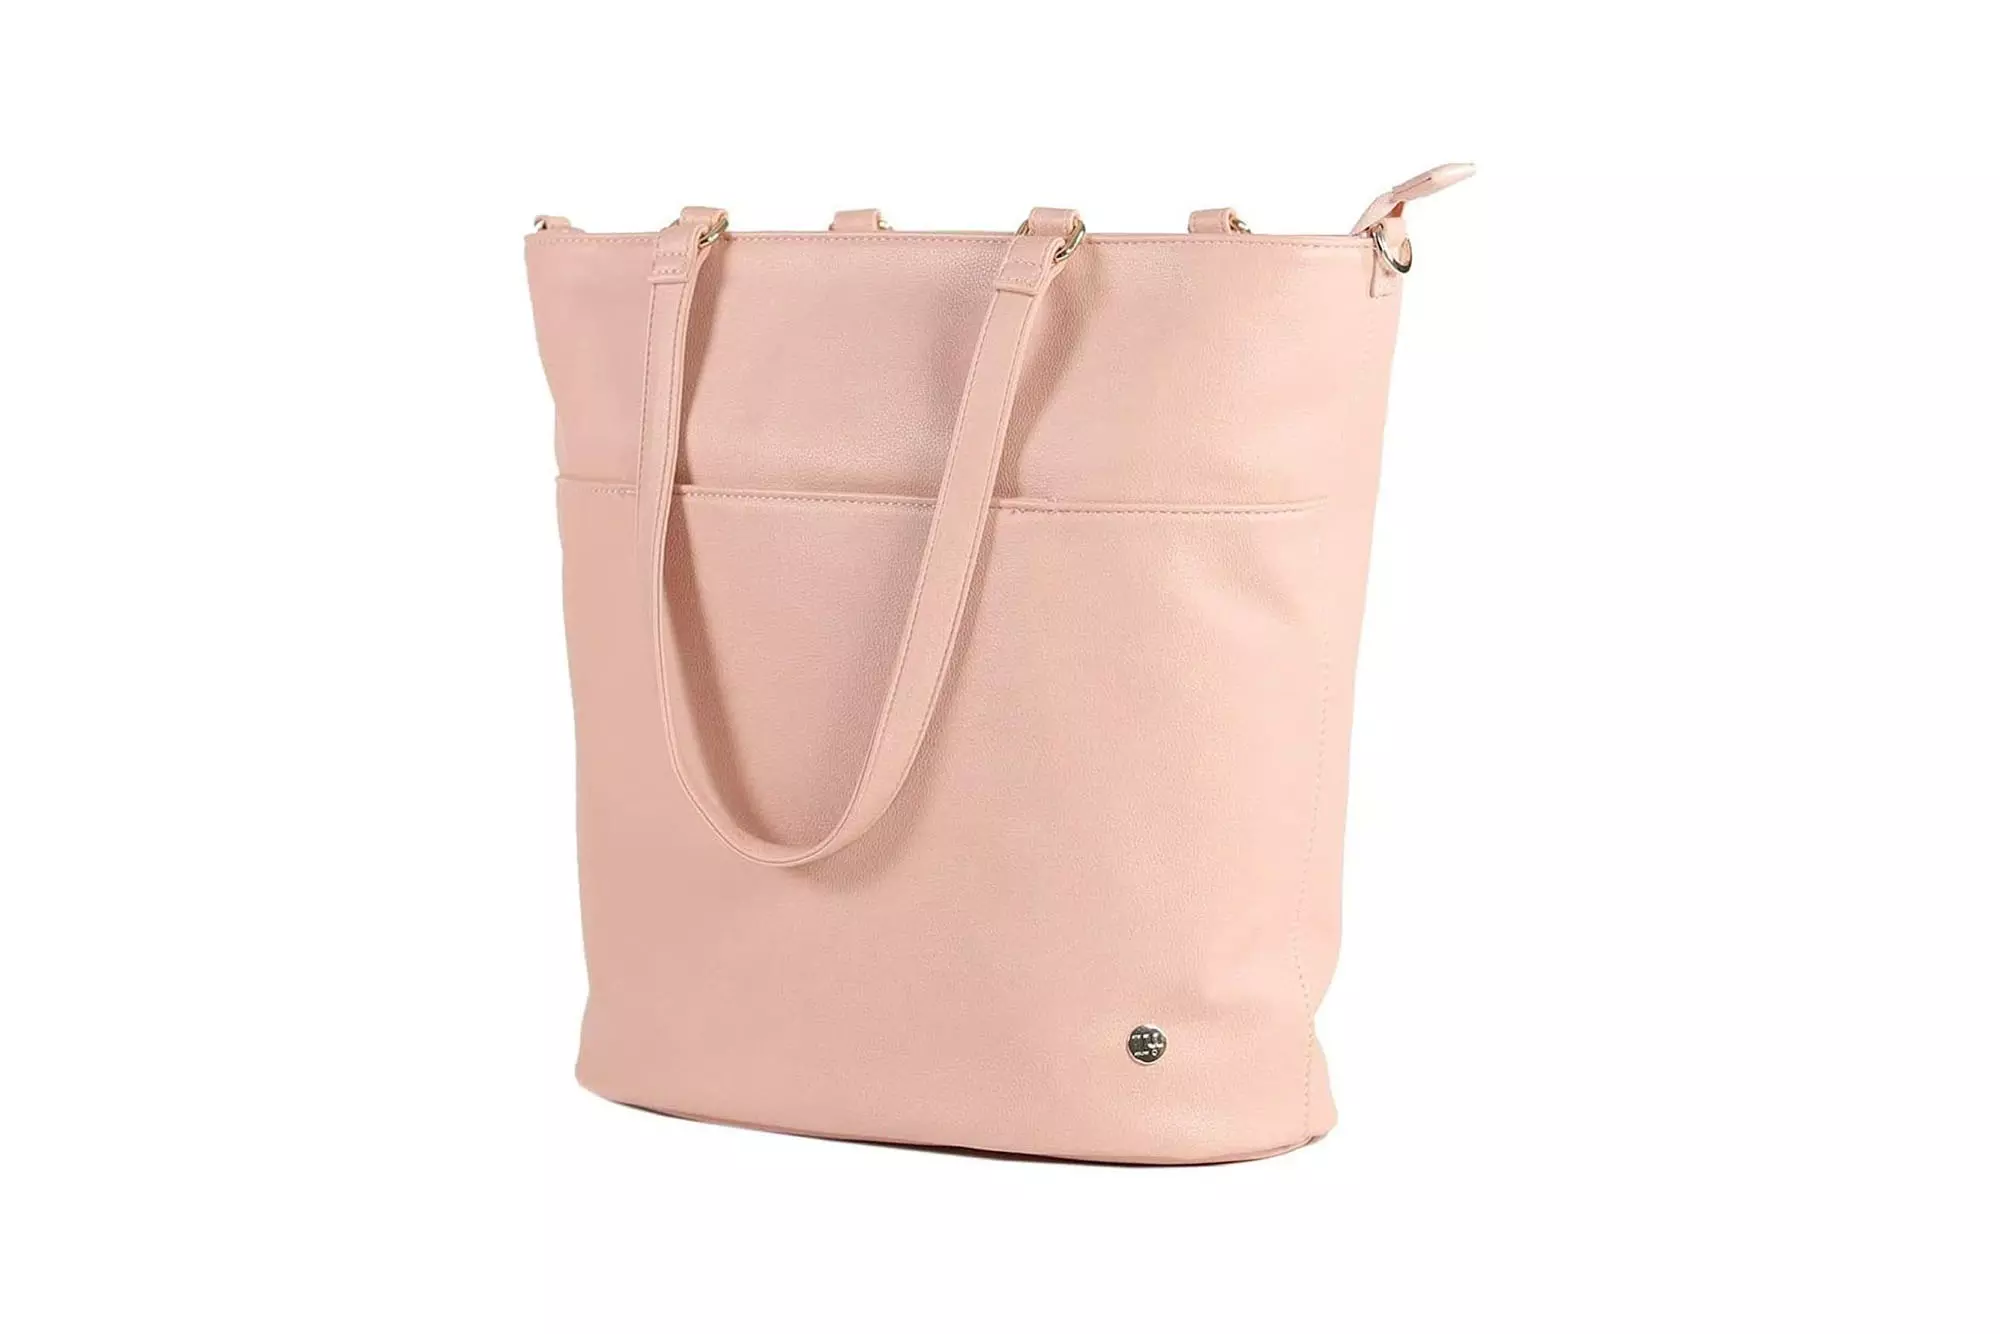 A pink bag with a handle.